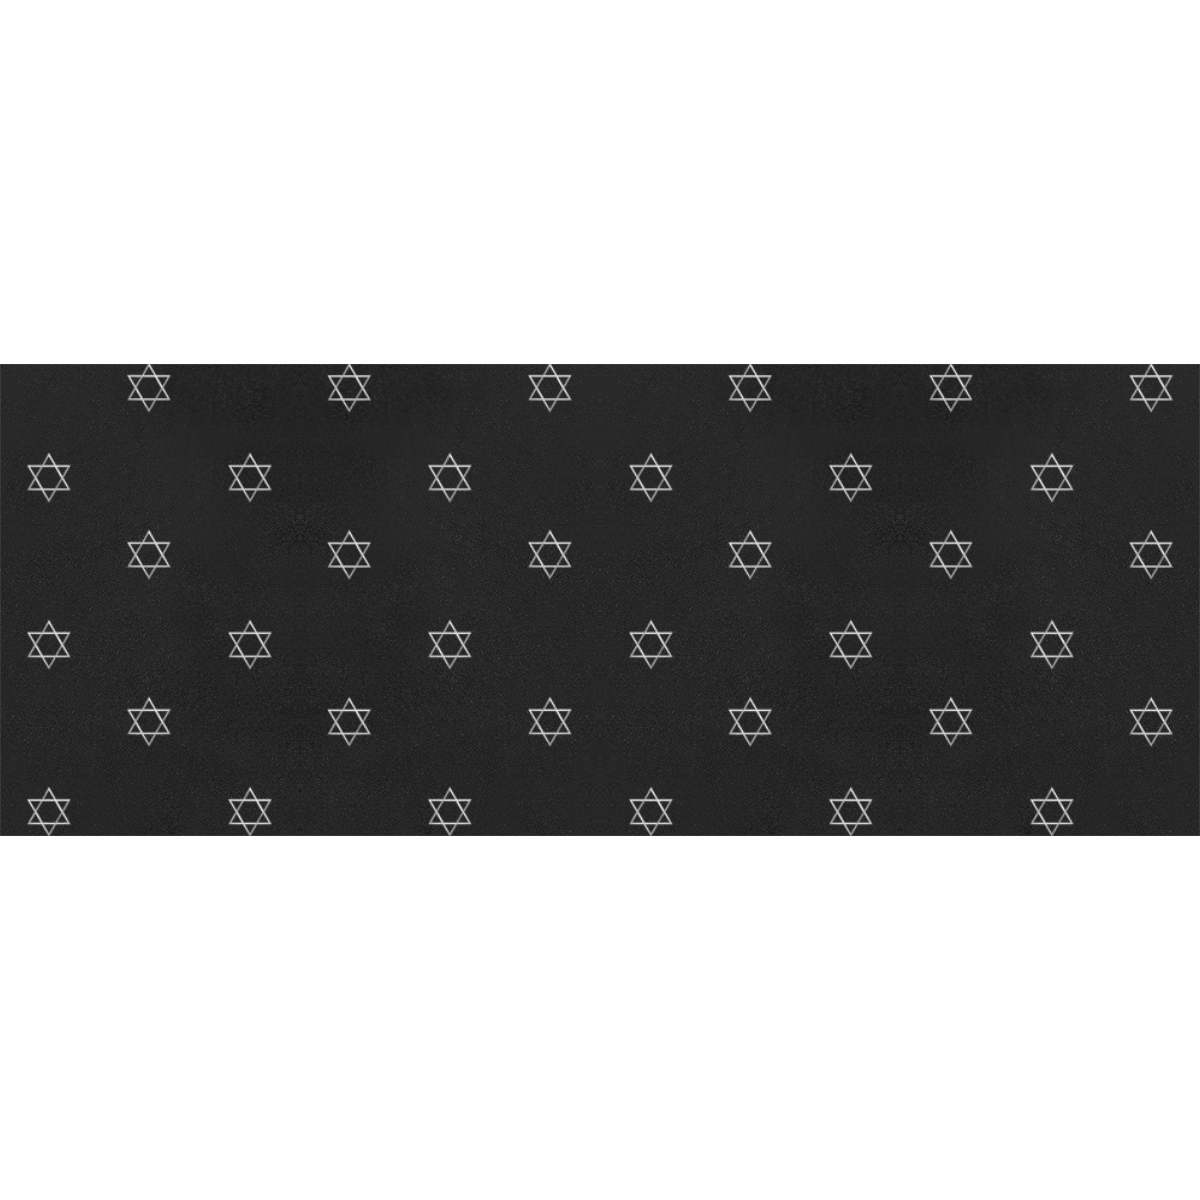 FAITH: Silver Star of David on Black Gift Wrapping Paper 58"x 23" (1 Roll)